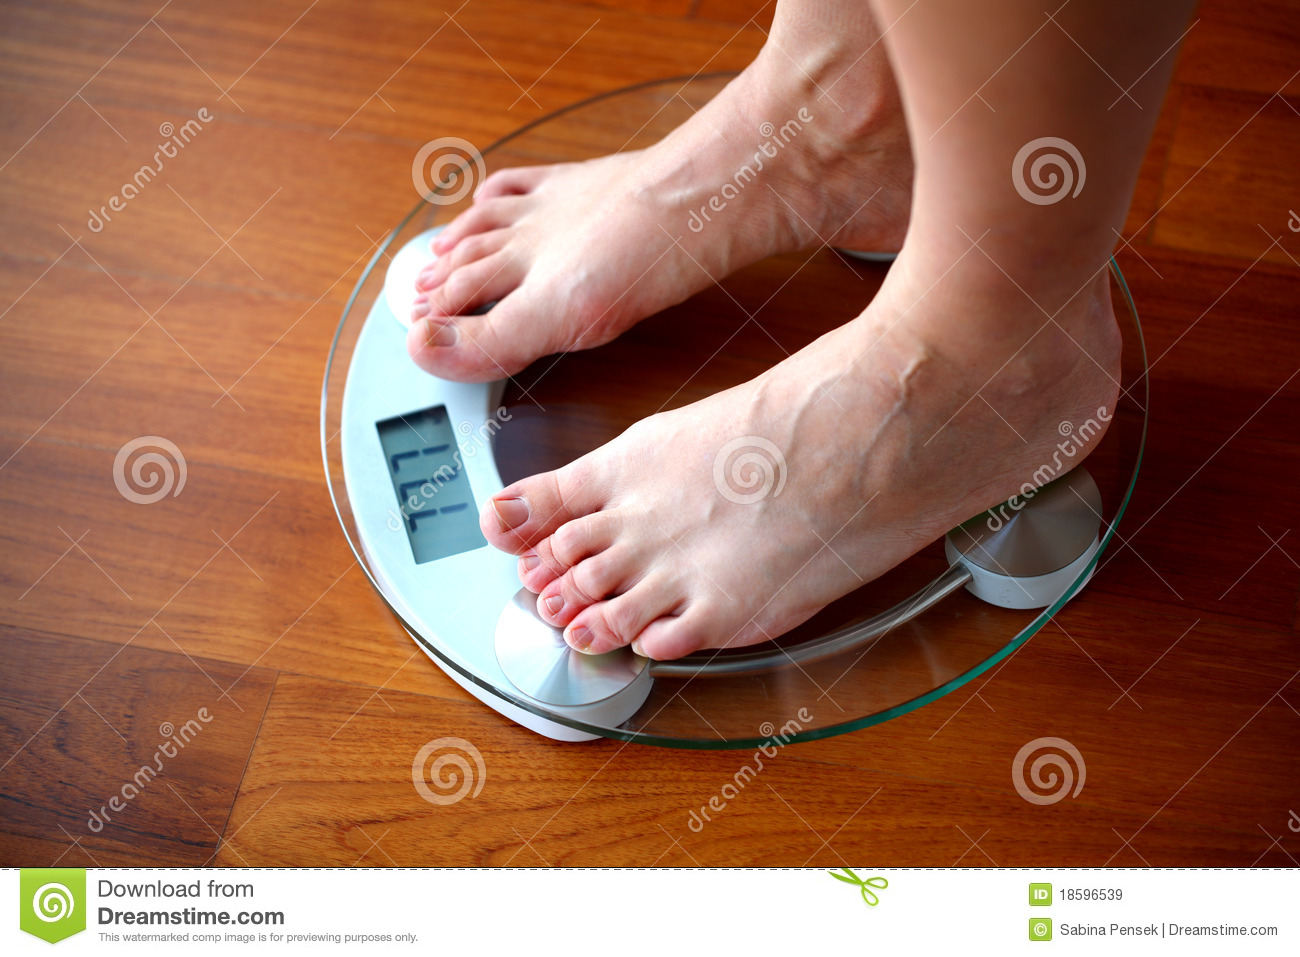 Woman Weighing Herself On The Home Weighing Scale